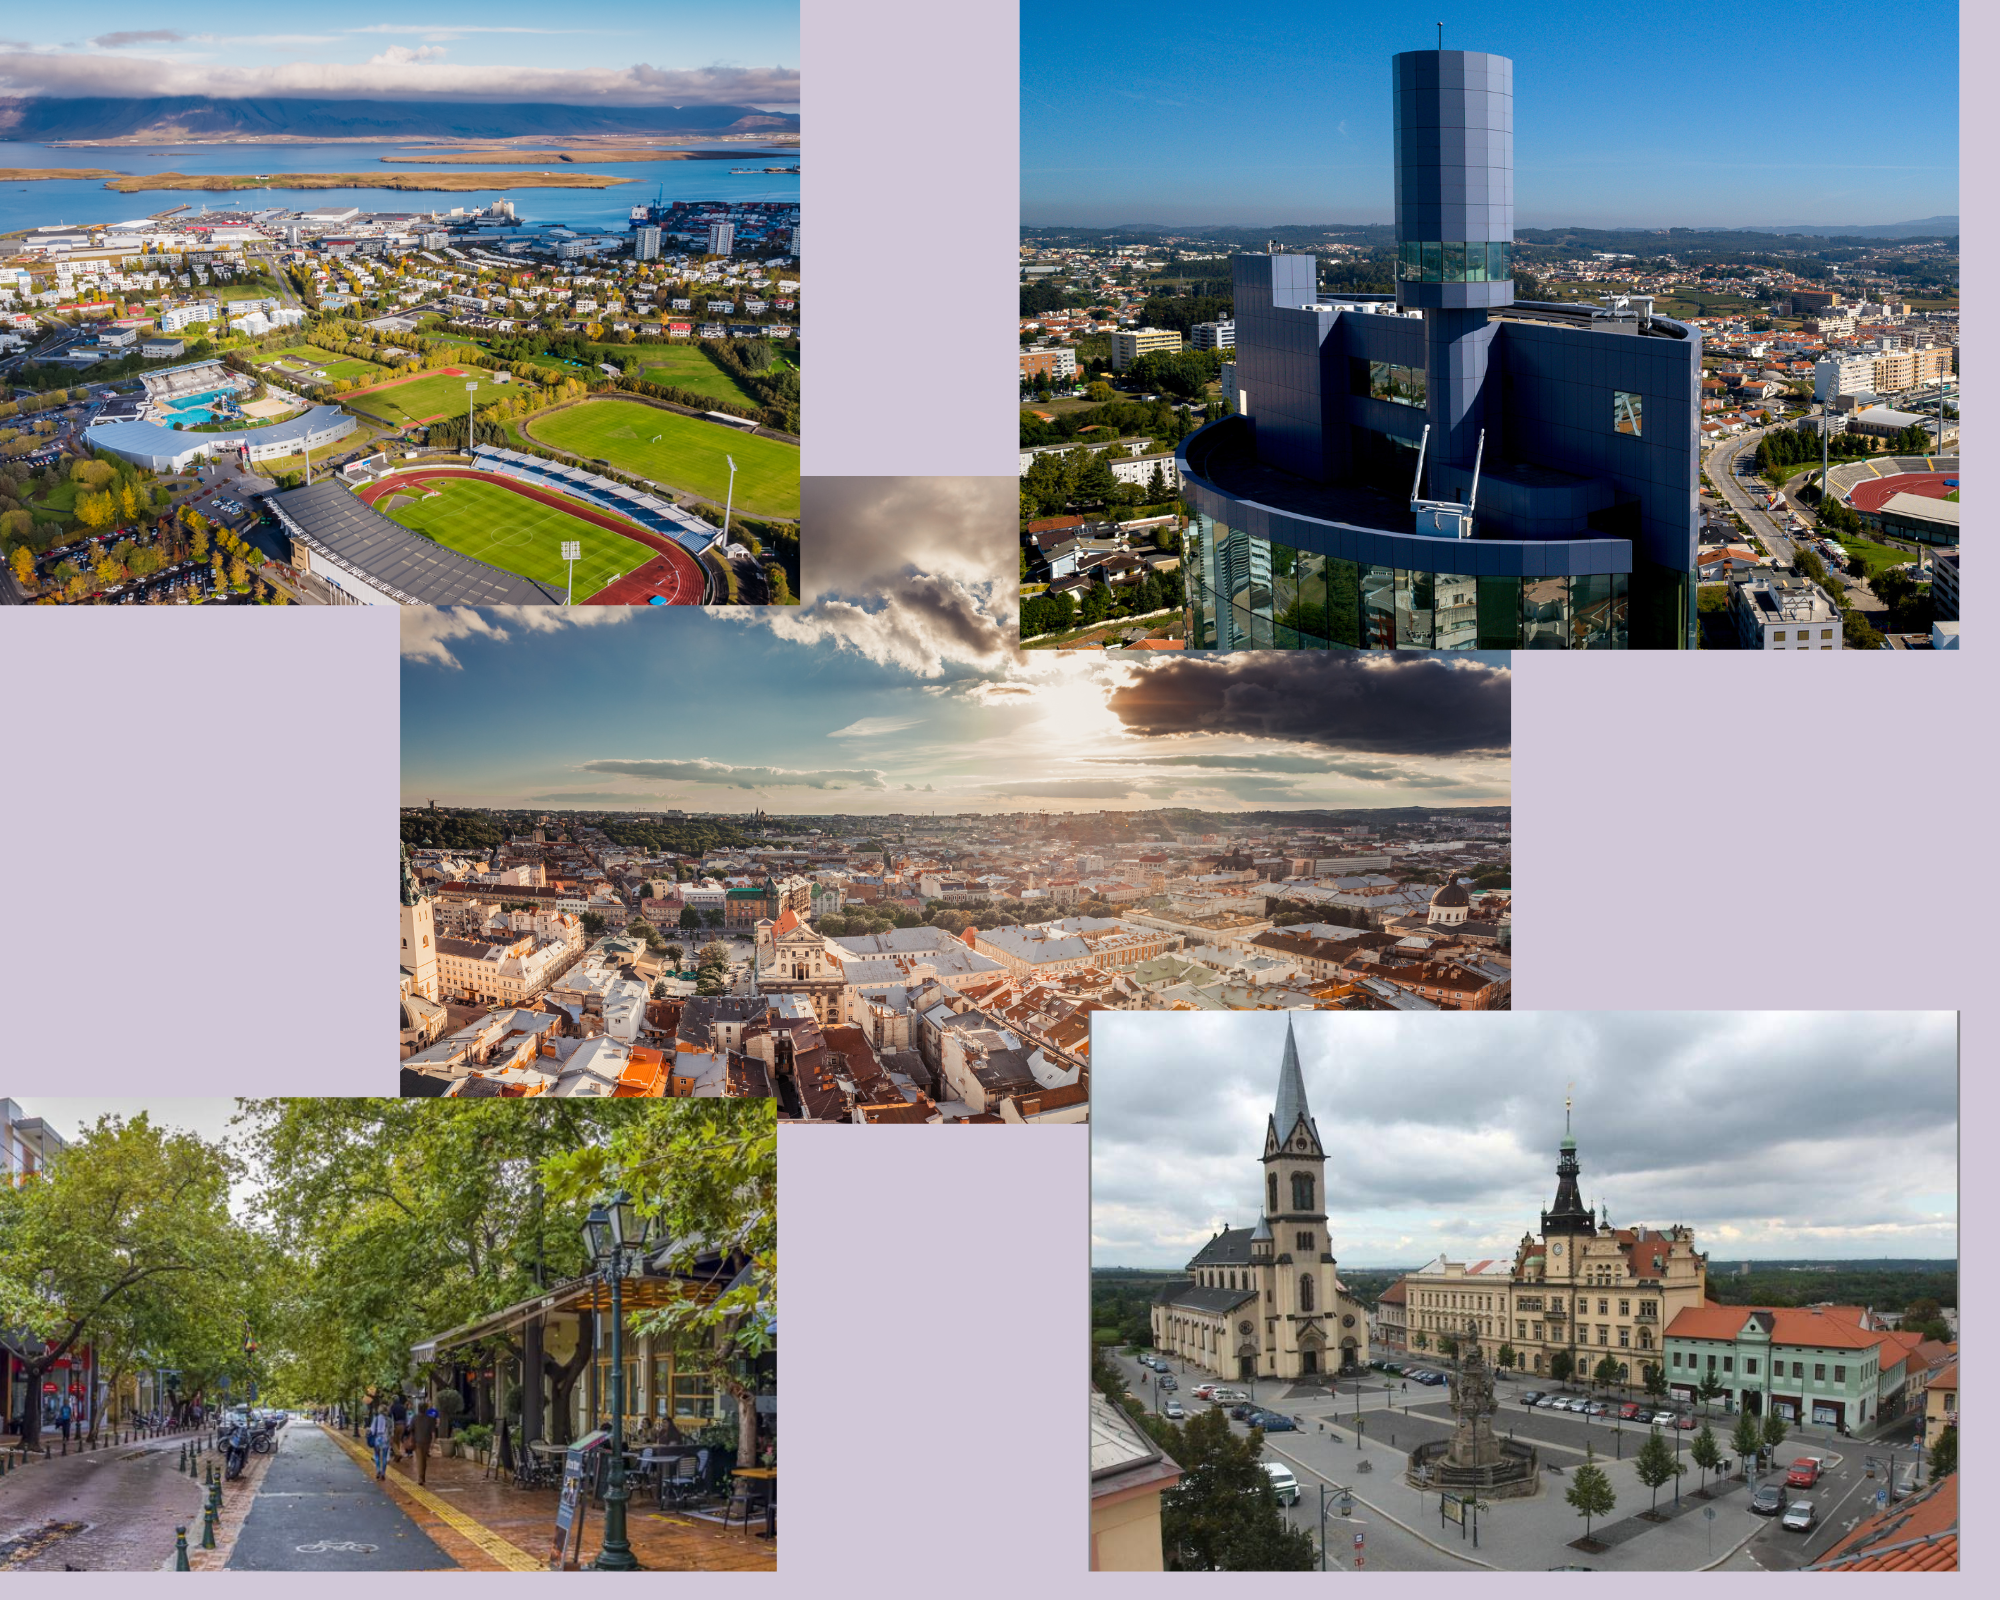 Positive Energy Districts: The 10 Replicated Solutions in Maia, Reykjavik, Kifissia, Kladno and Lviv